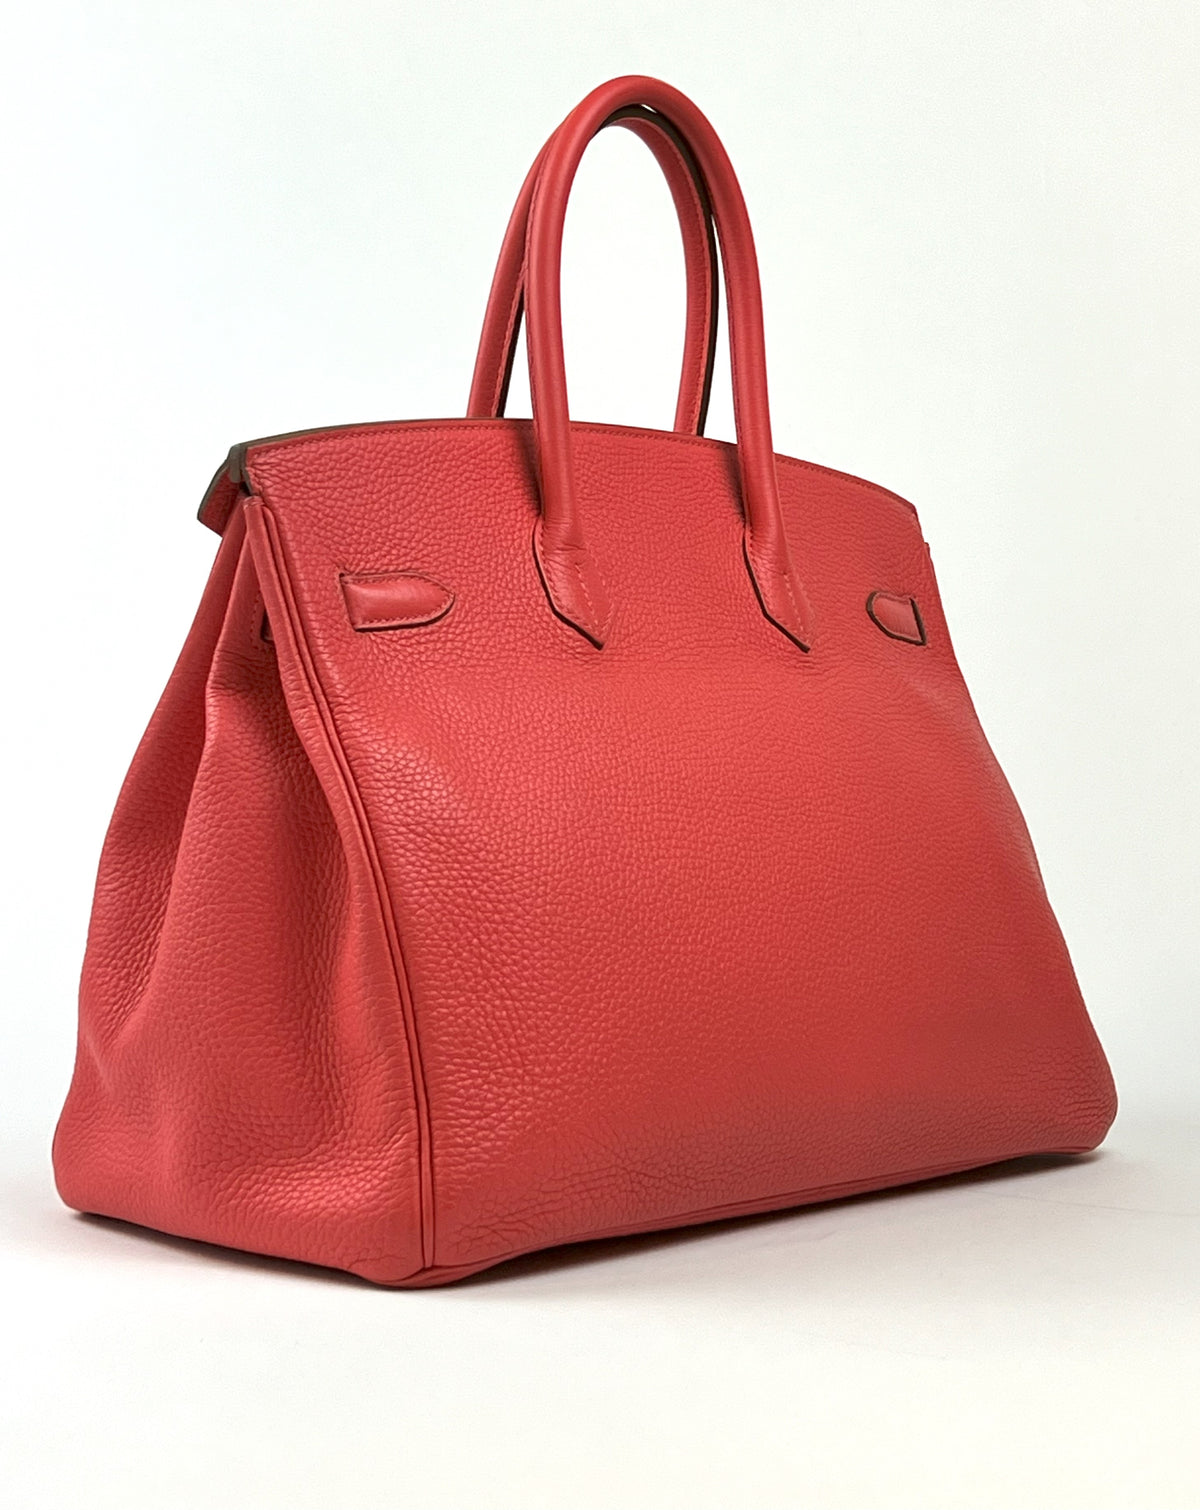 Excellent Pre-Loved Bright Rosy Red Grained Leather Top Handle Bag (back)